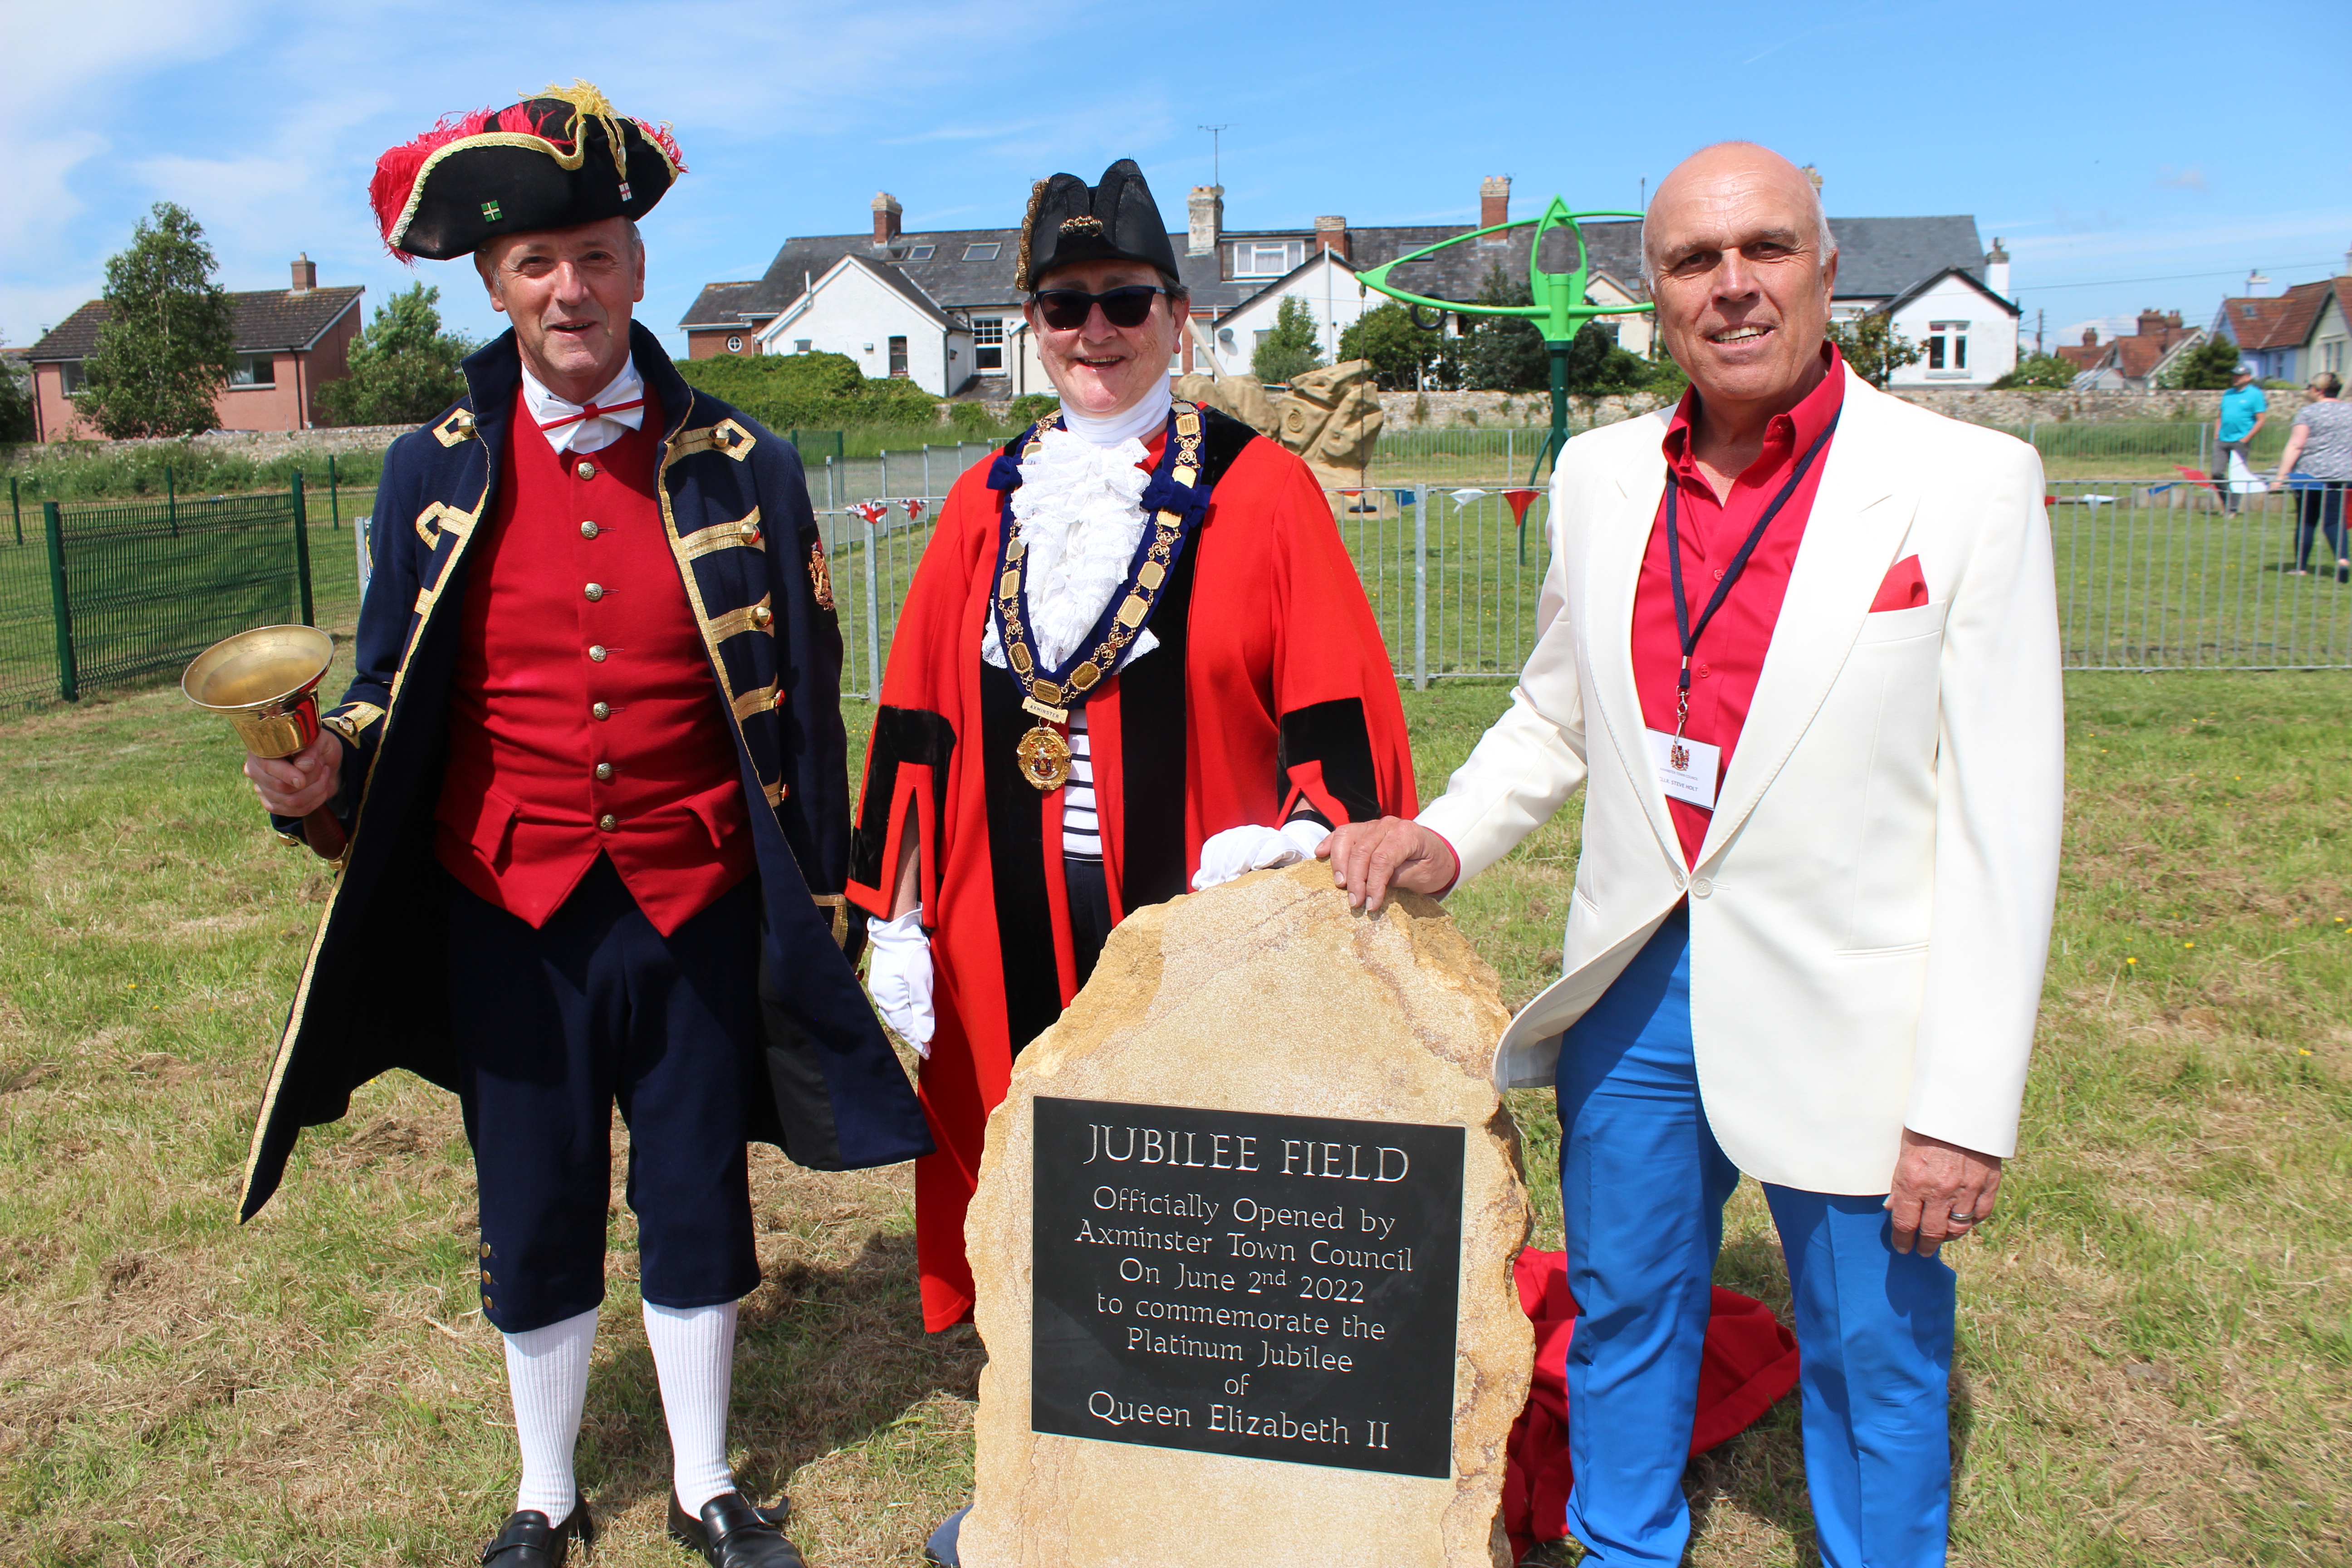 The Mayor of Axminster, Cllr Jill Farrow, pictured with town clerk Nick Goodwin and Cllr Steve Holt at the opening of Jubilee Field.